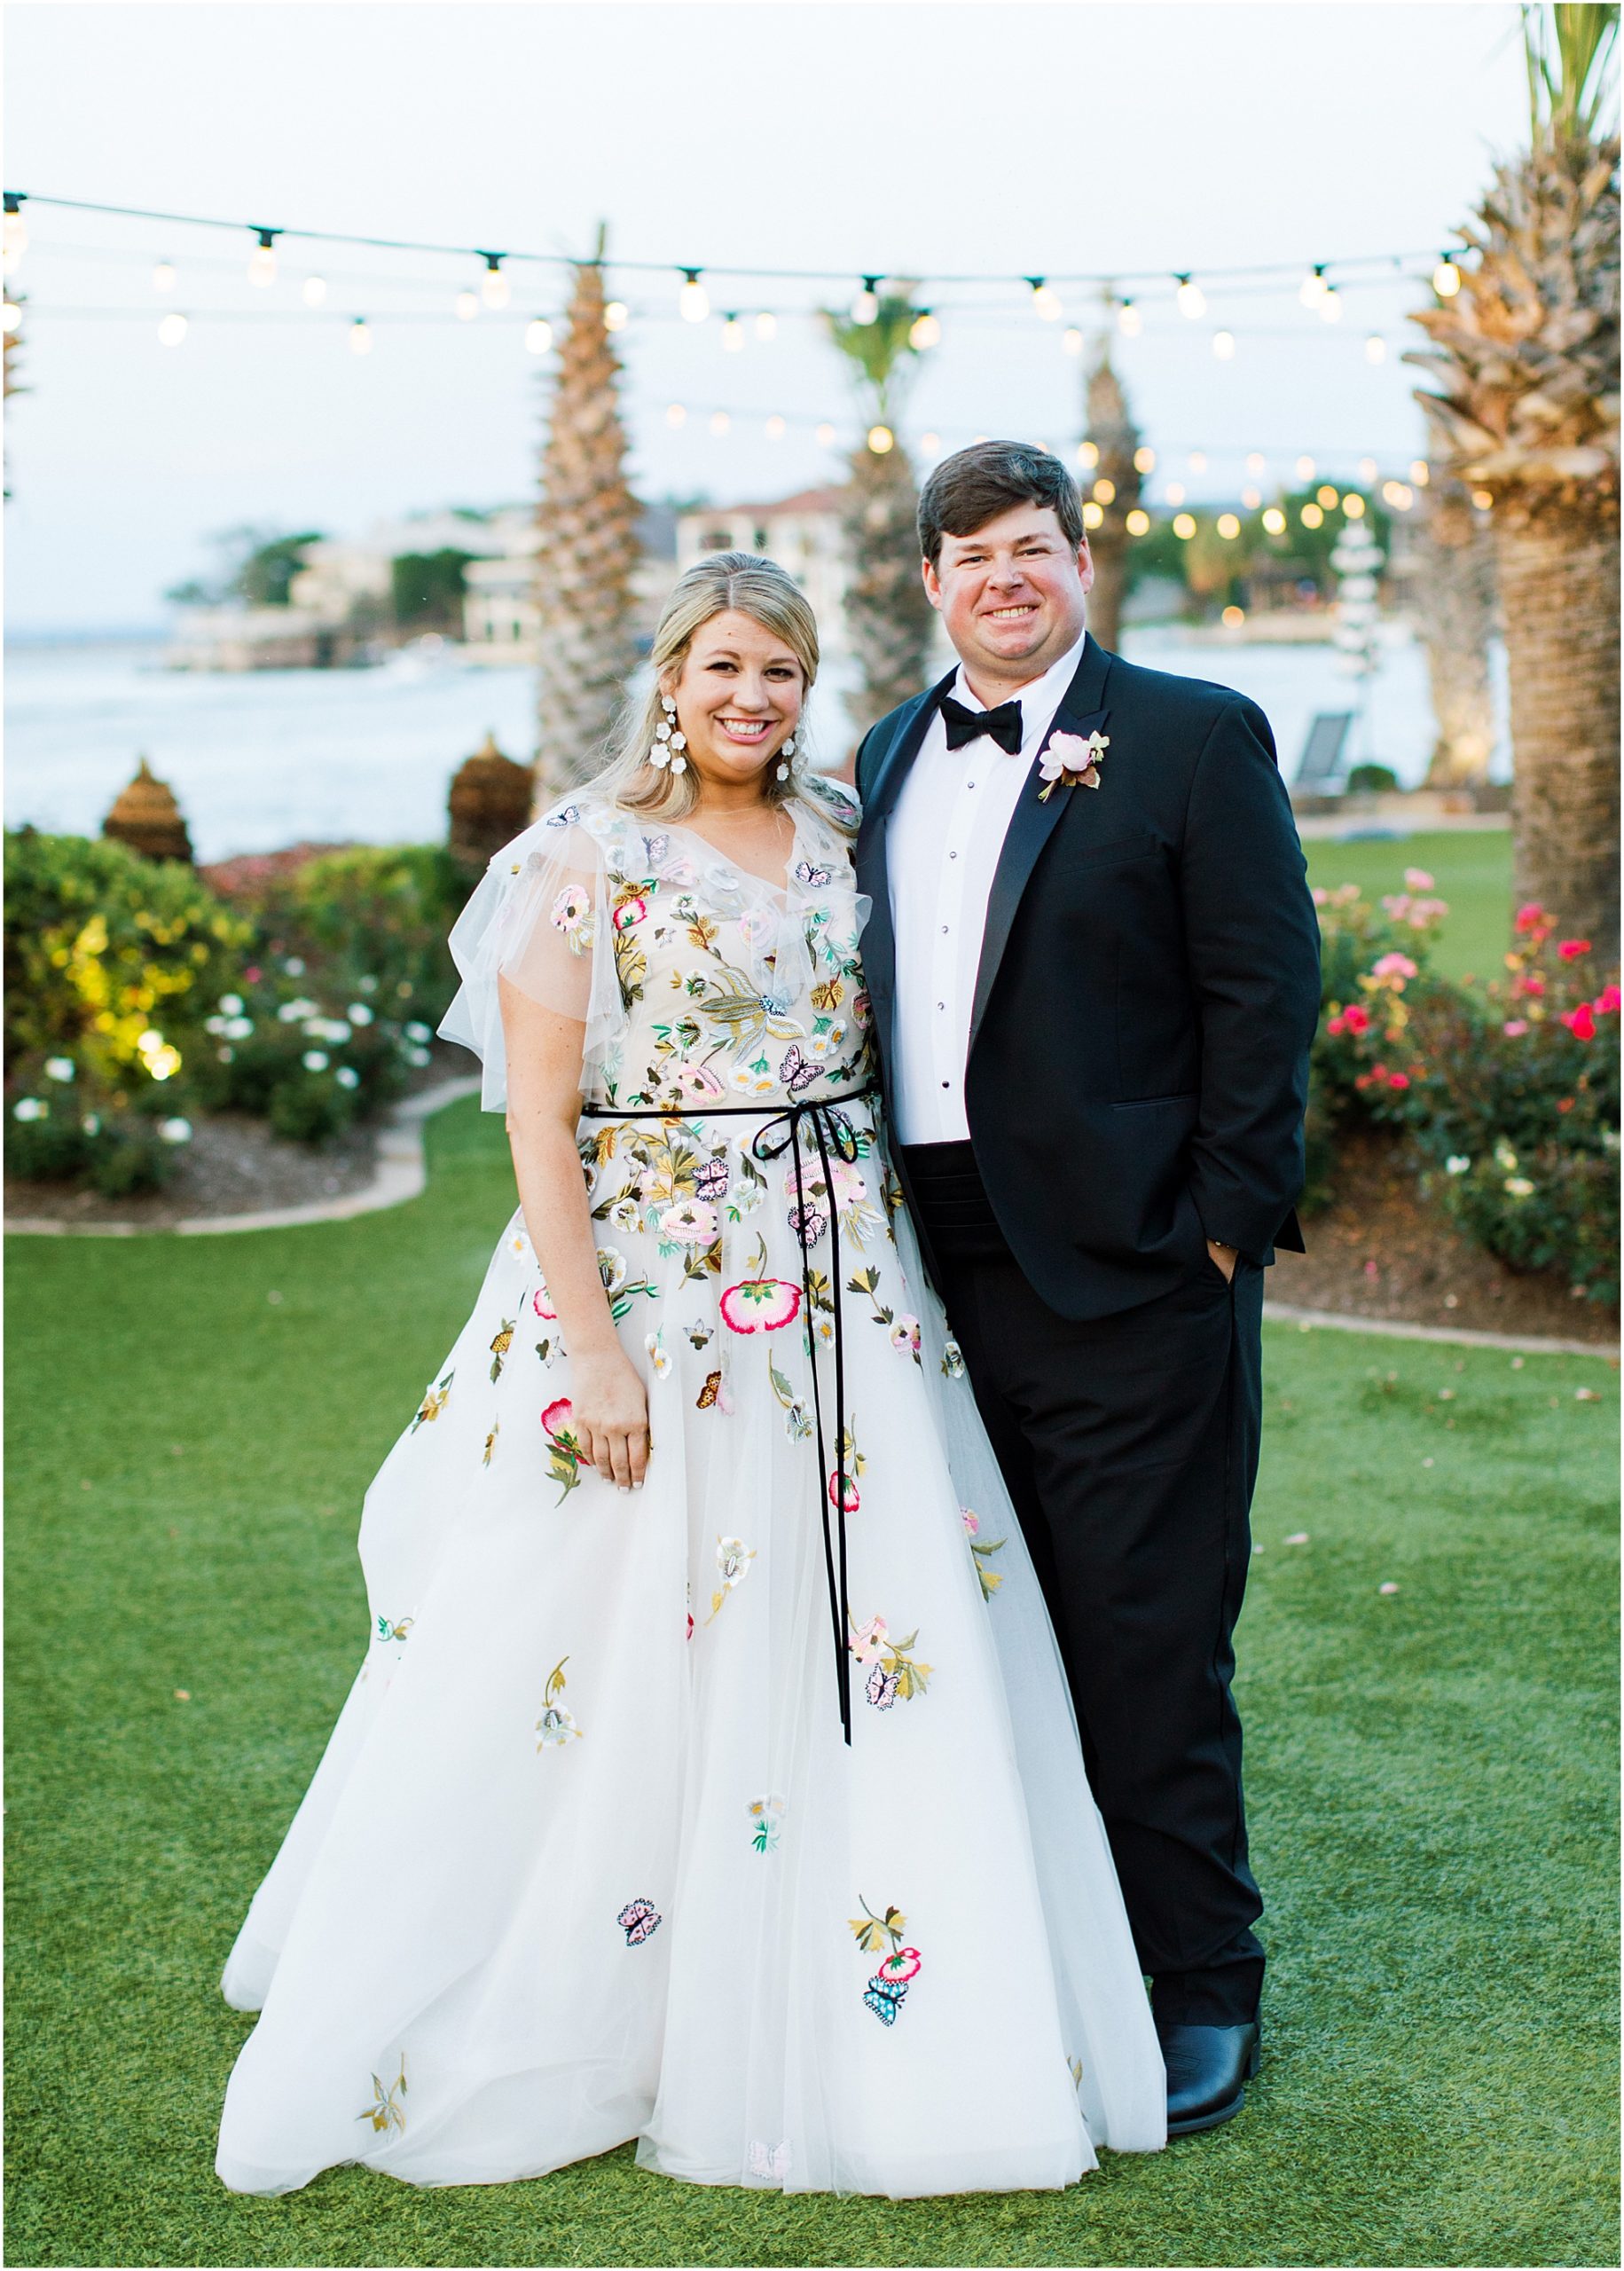 Bride in Monique Lhuillier bridal gown with butterflies anf flowers with groom wearing a black tux at horse shoe bay resort